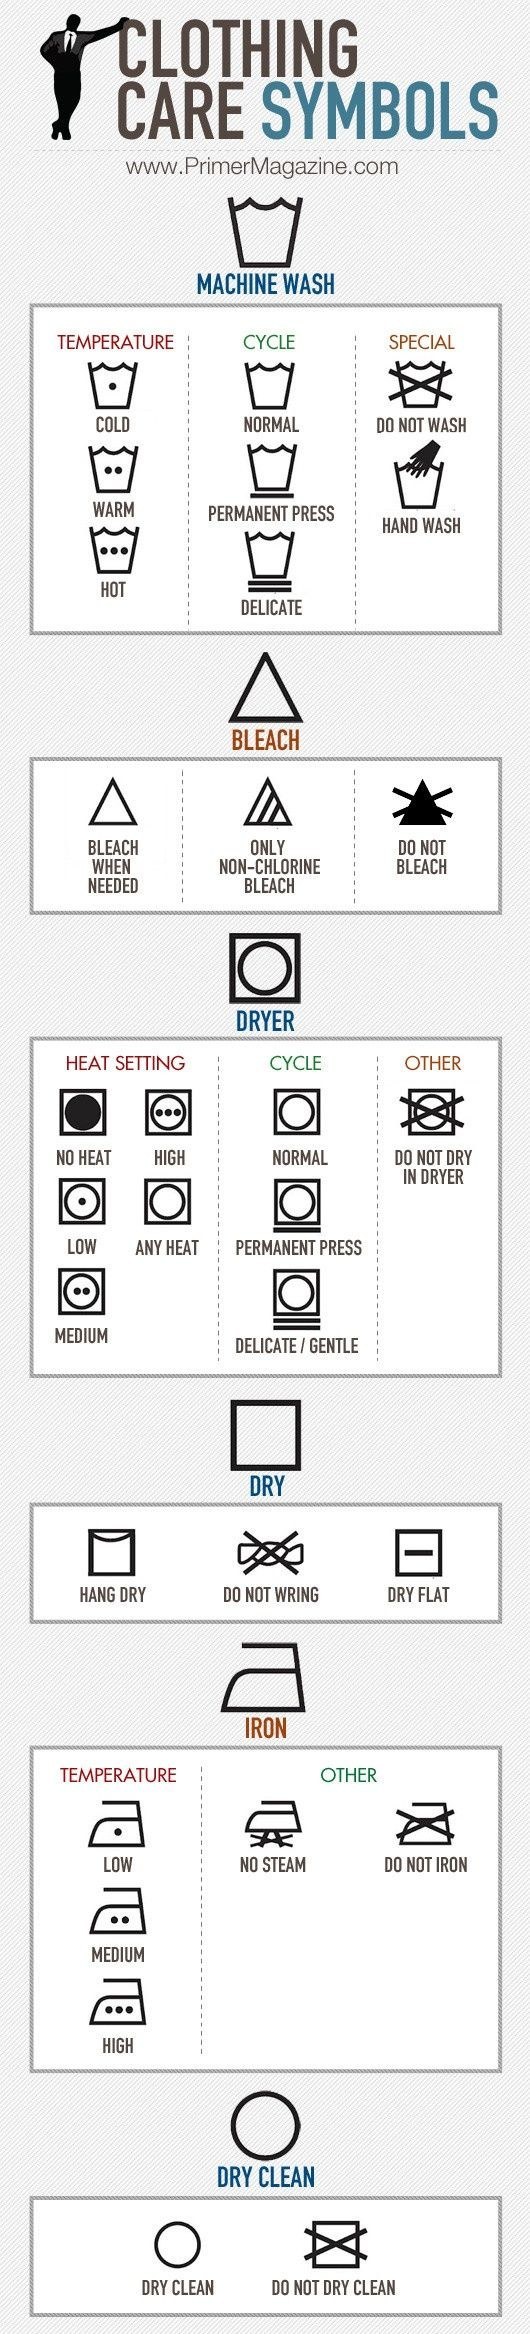 And finally, you're gonna wanna wash all your awesome swag (though you should definitely probably dry clean your suits and dress shirts). Here are what all those symbols on your clothes mean: